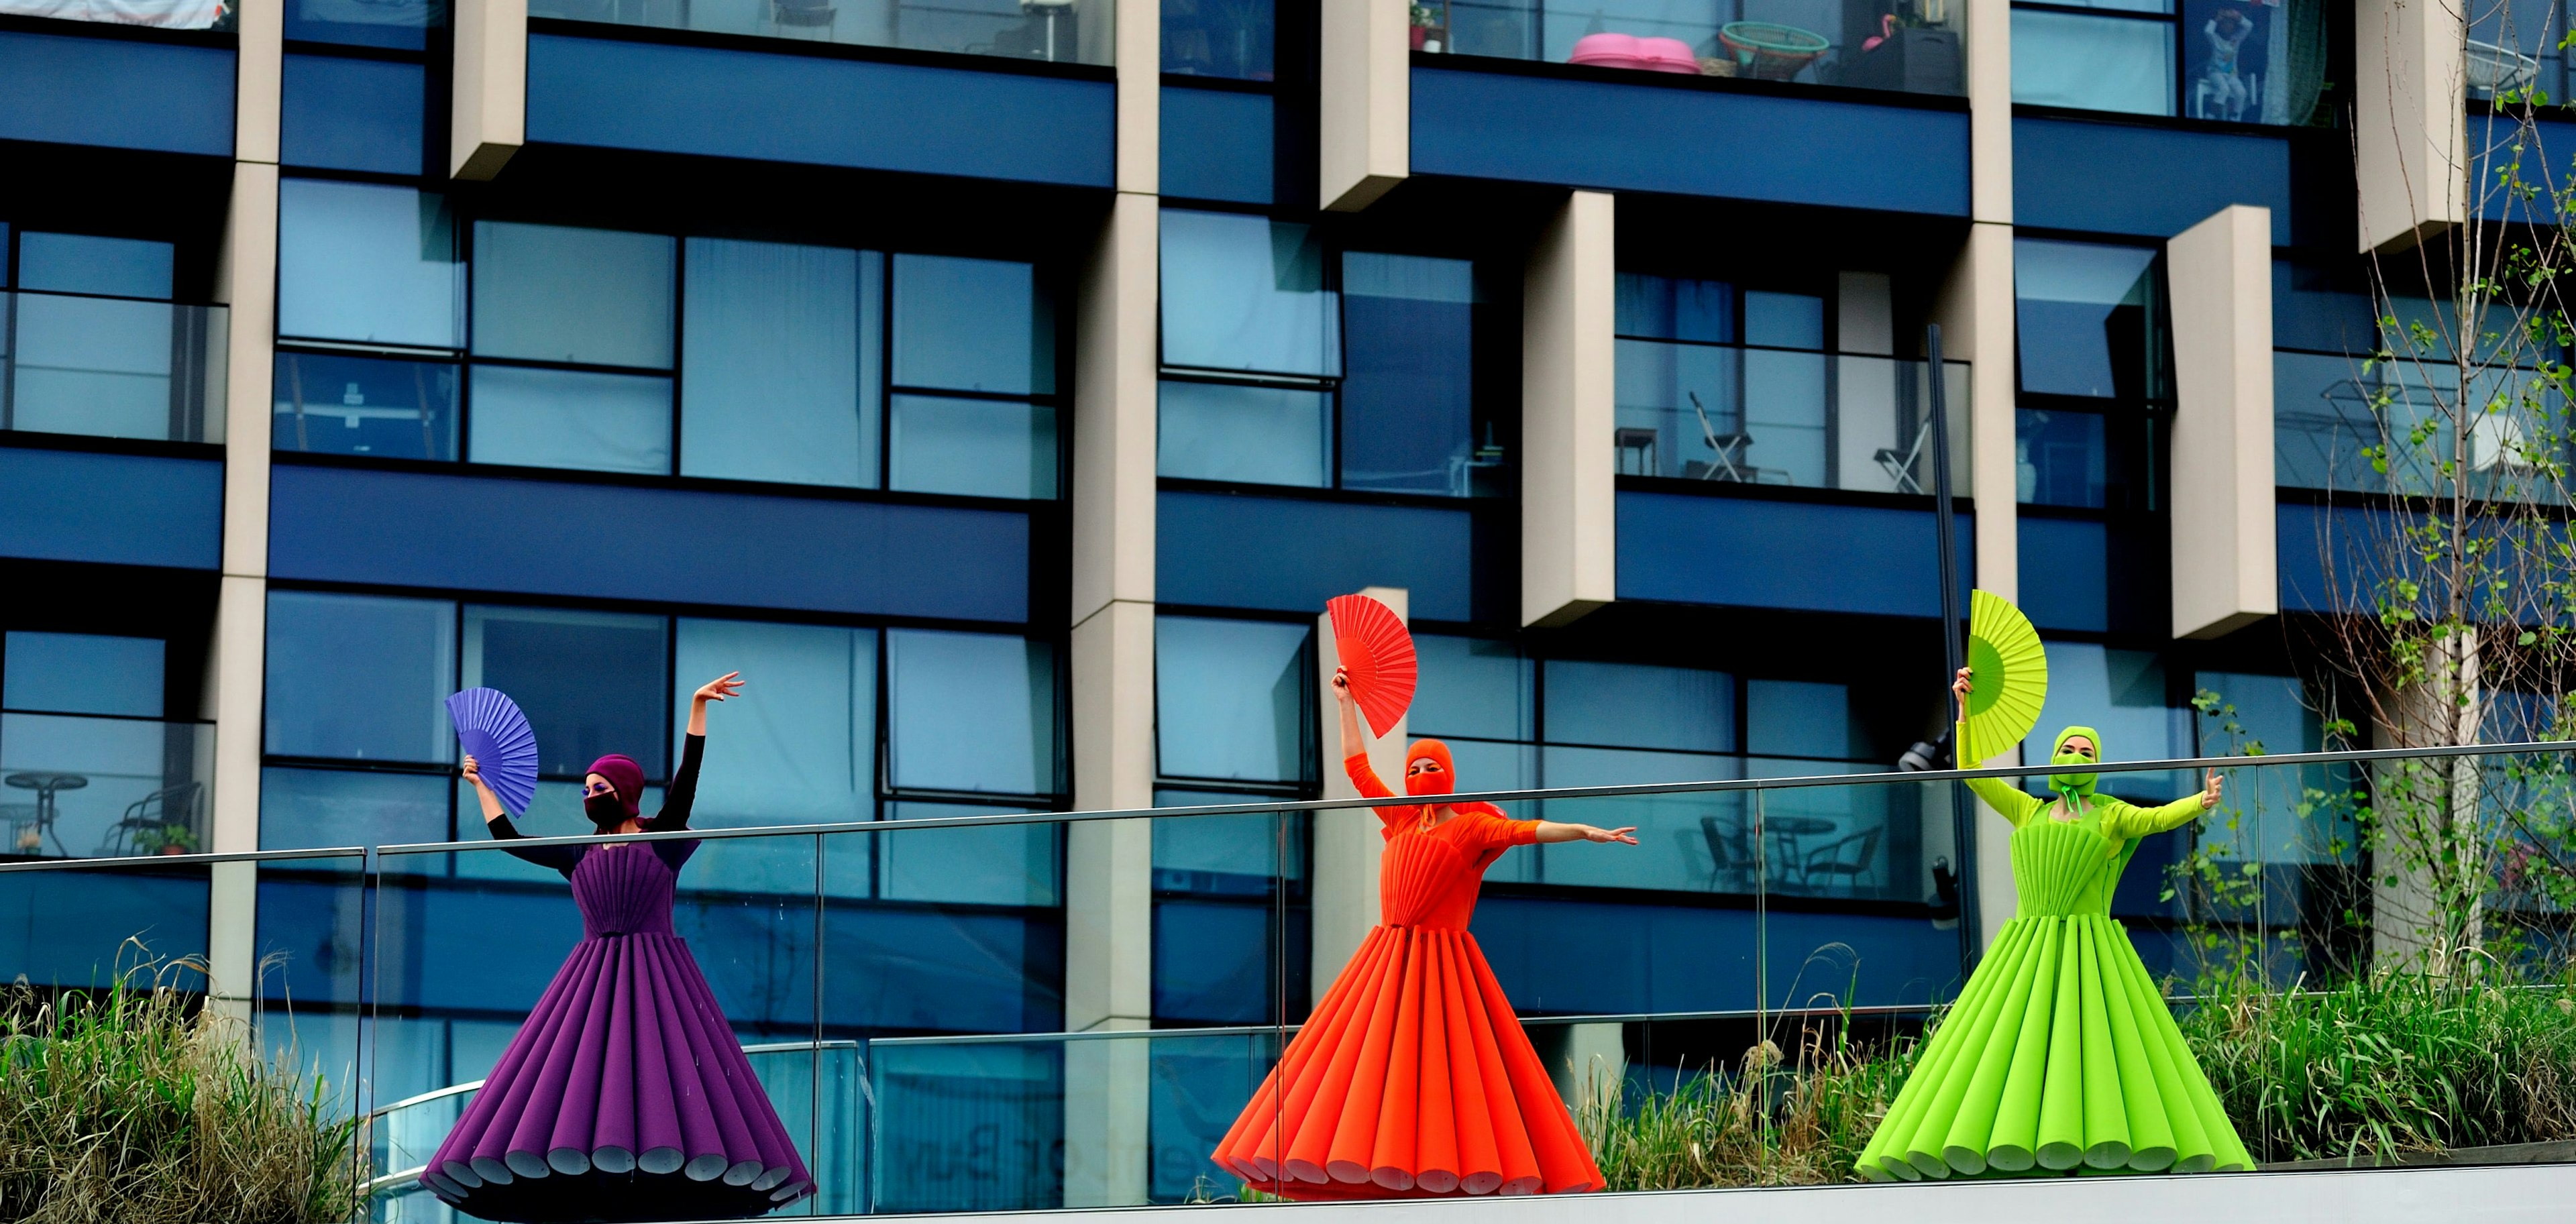 3 people dressed in single bright coloured dresses performing a dance with a Greenwich Peninsula building in the background